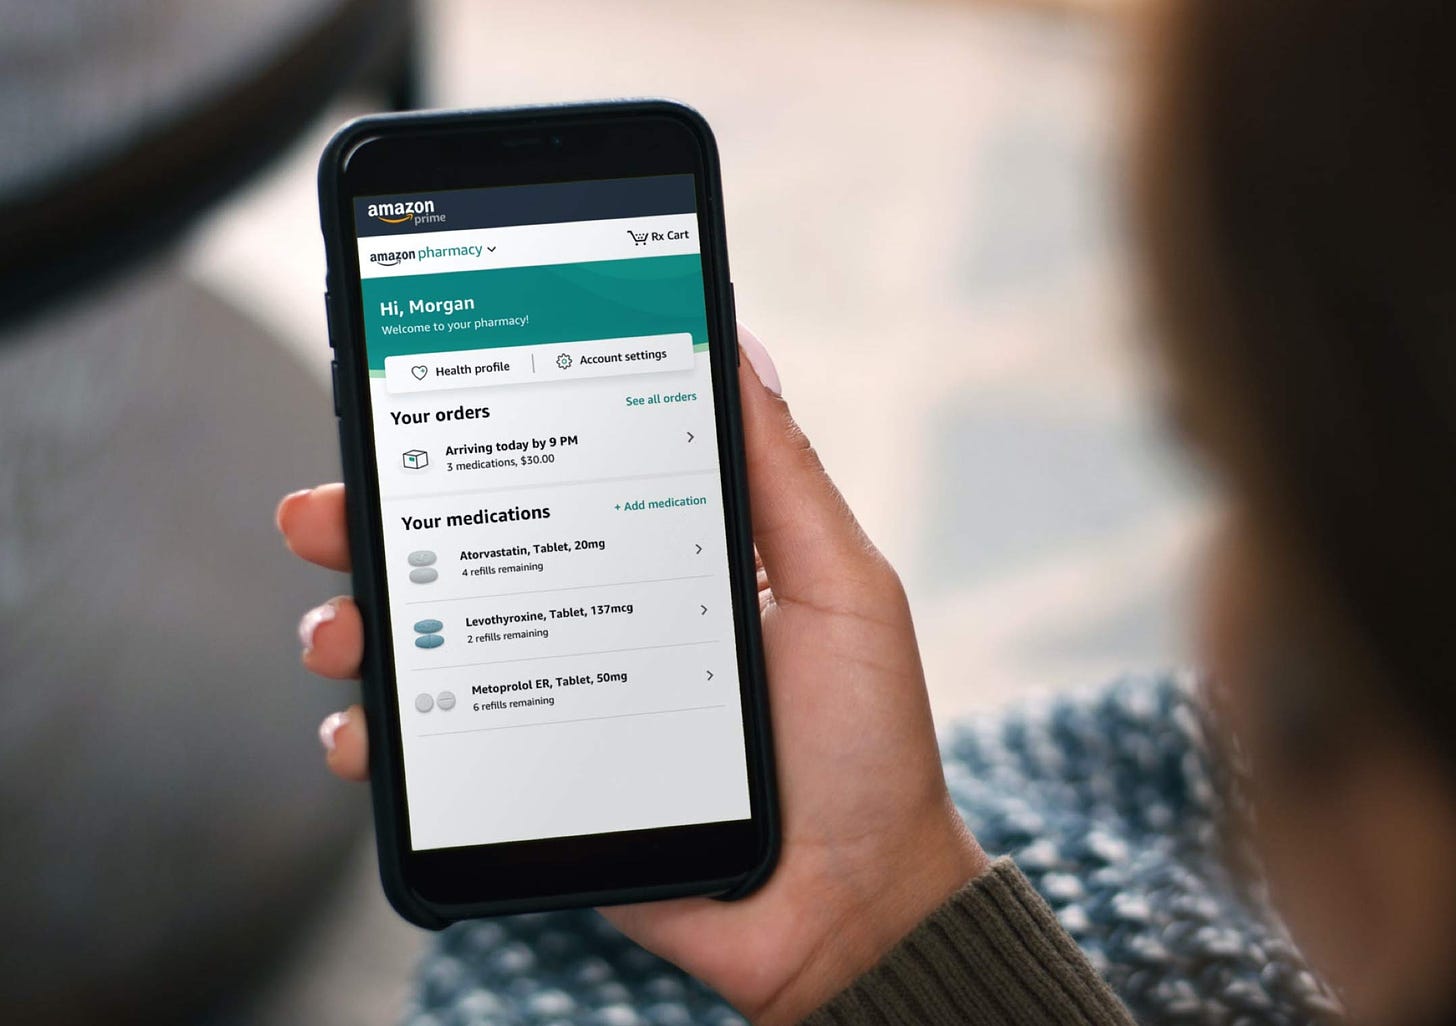 Amazon Pharmacy can manage all medications and orders in one place